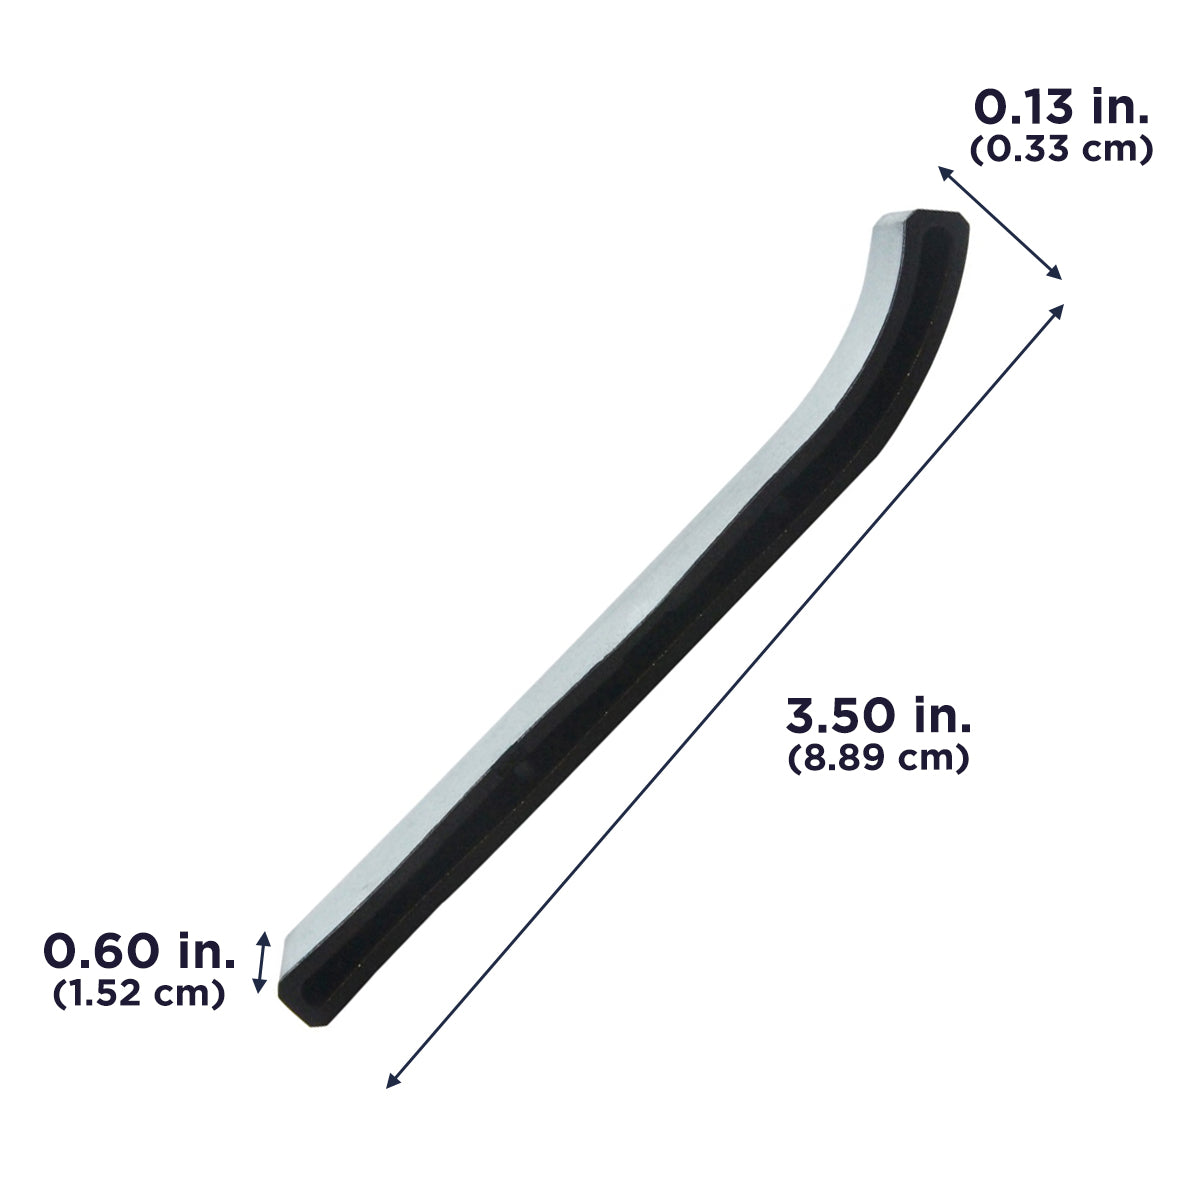 This blade tip is 3.5 in. (8.89 cm) long, 0.13 in. (0.33 cm) high and 0.6 in. (1.52 cm) wide.